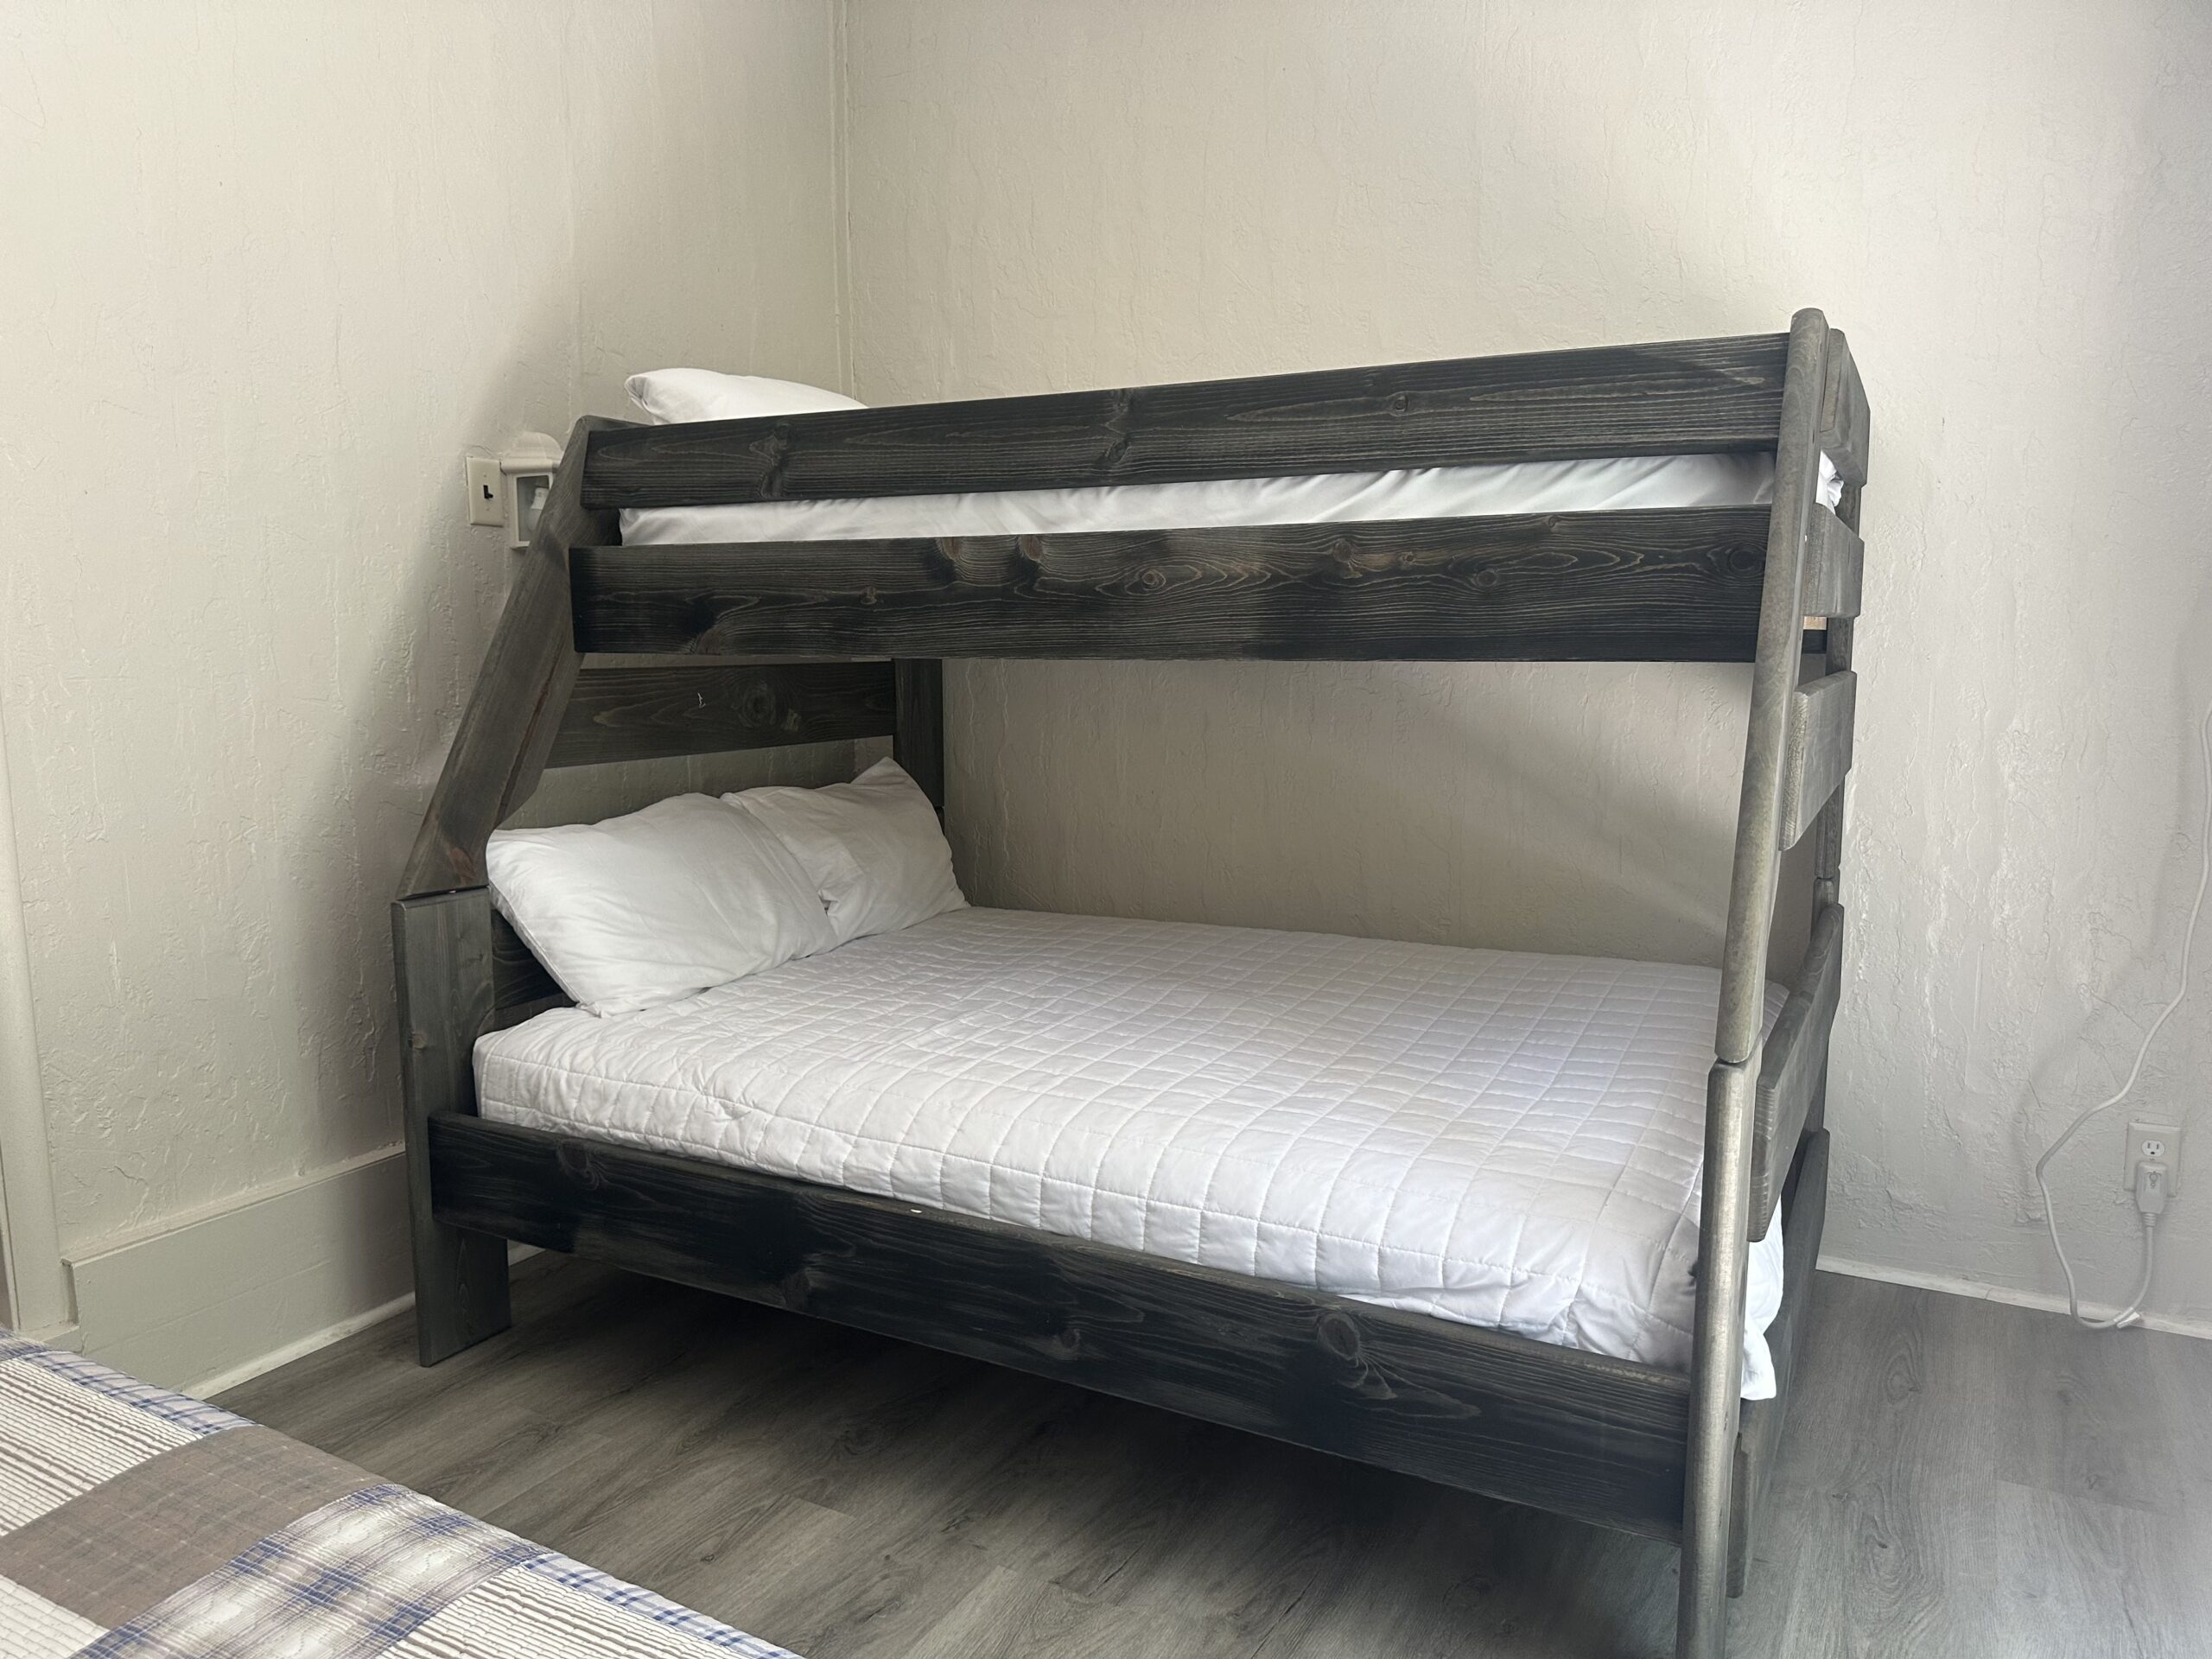 a bunk bed in a room with white walls